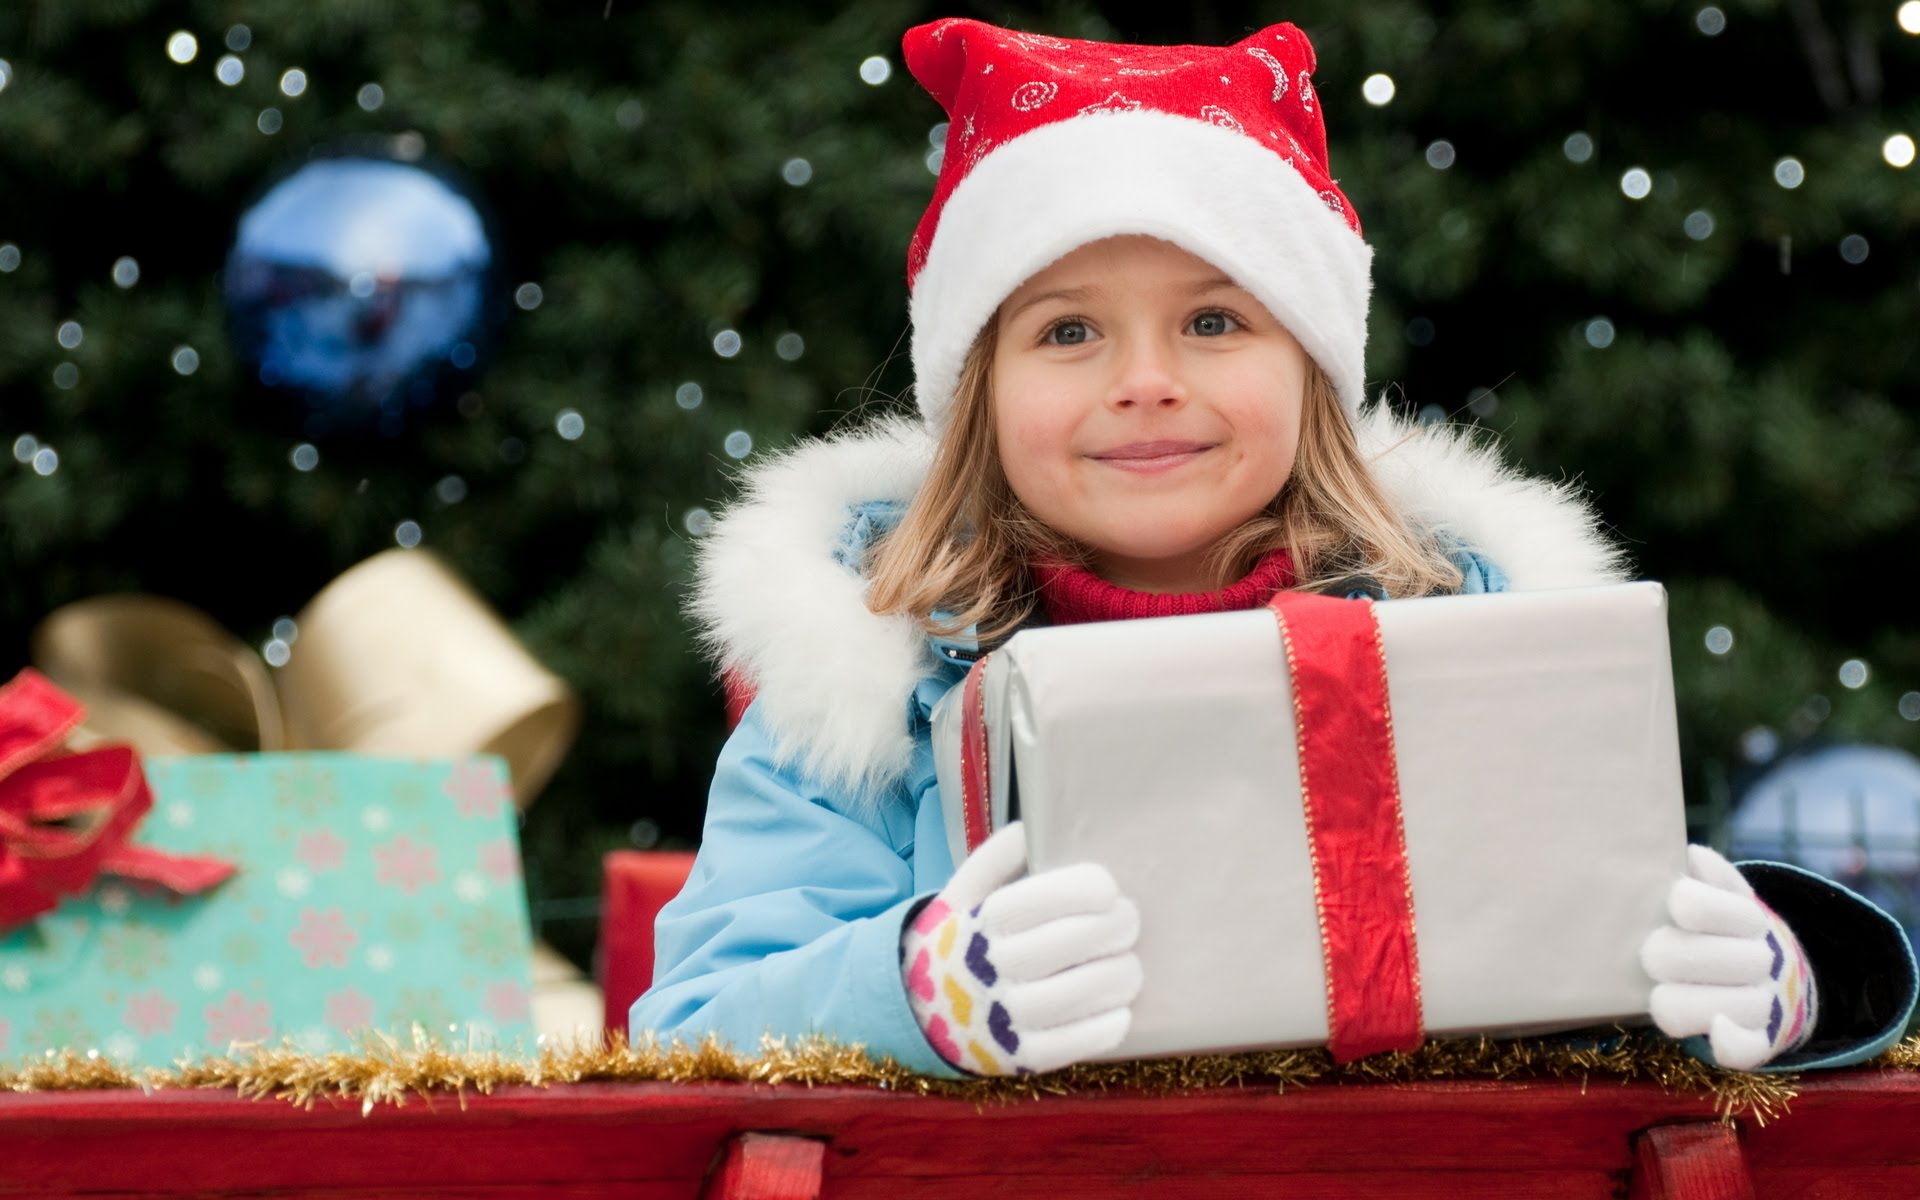 Top 10 Christmas Gifts idea for kids 2015 - YouTube